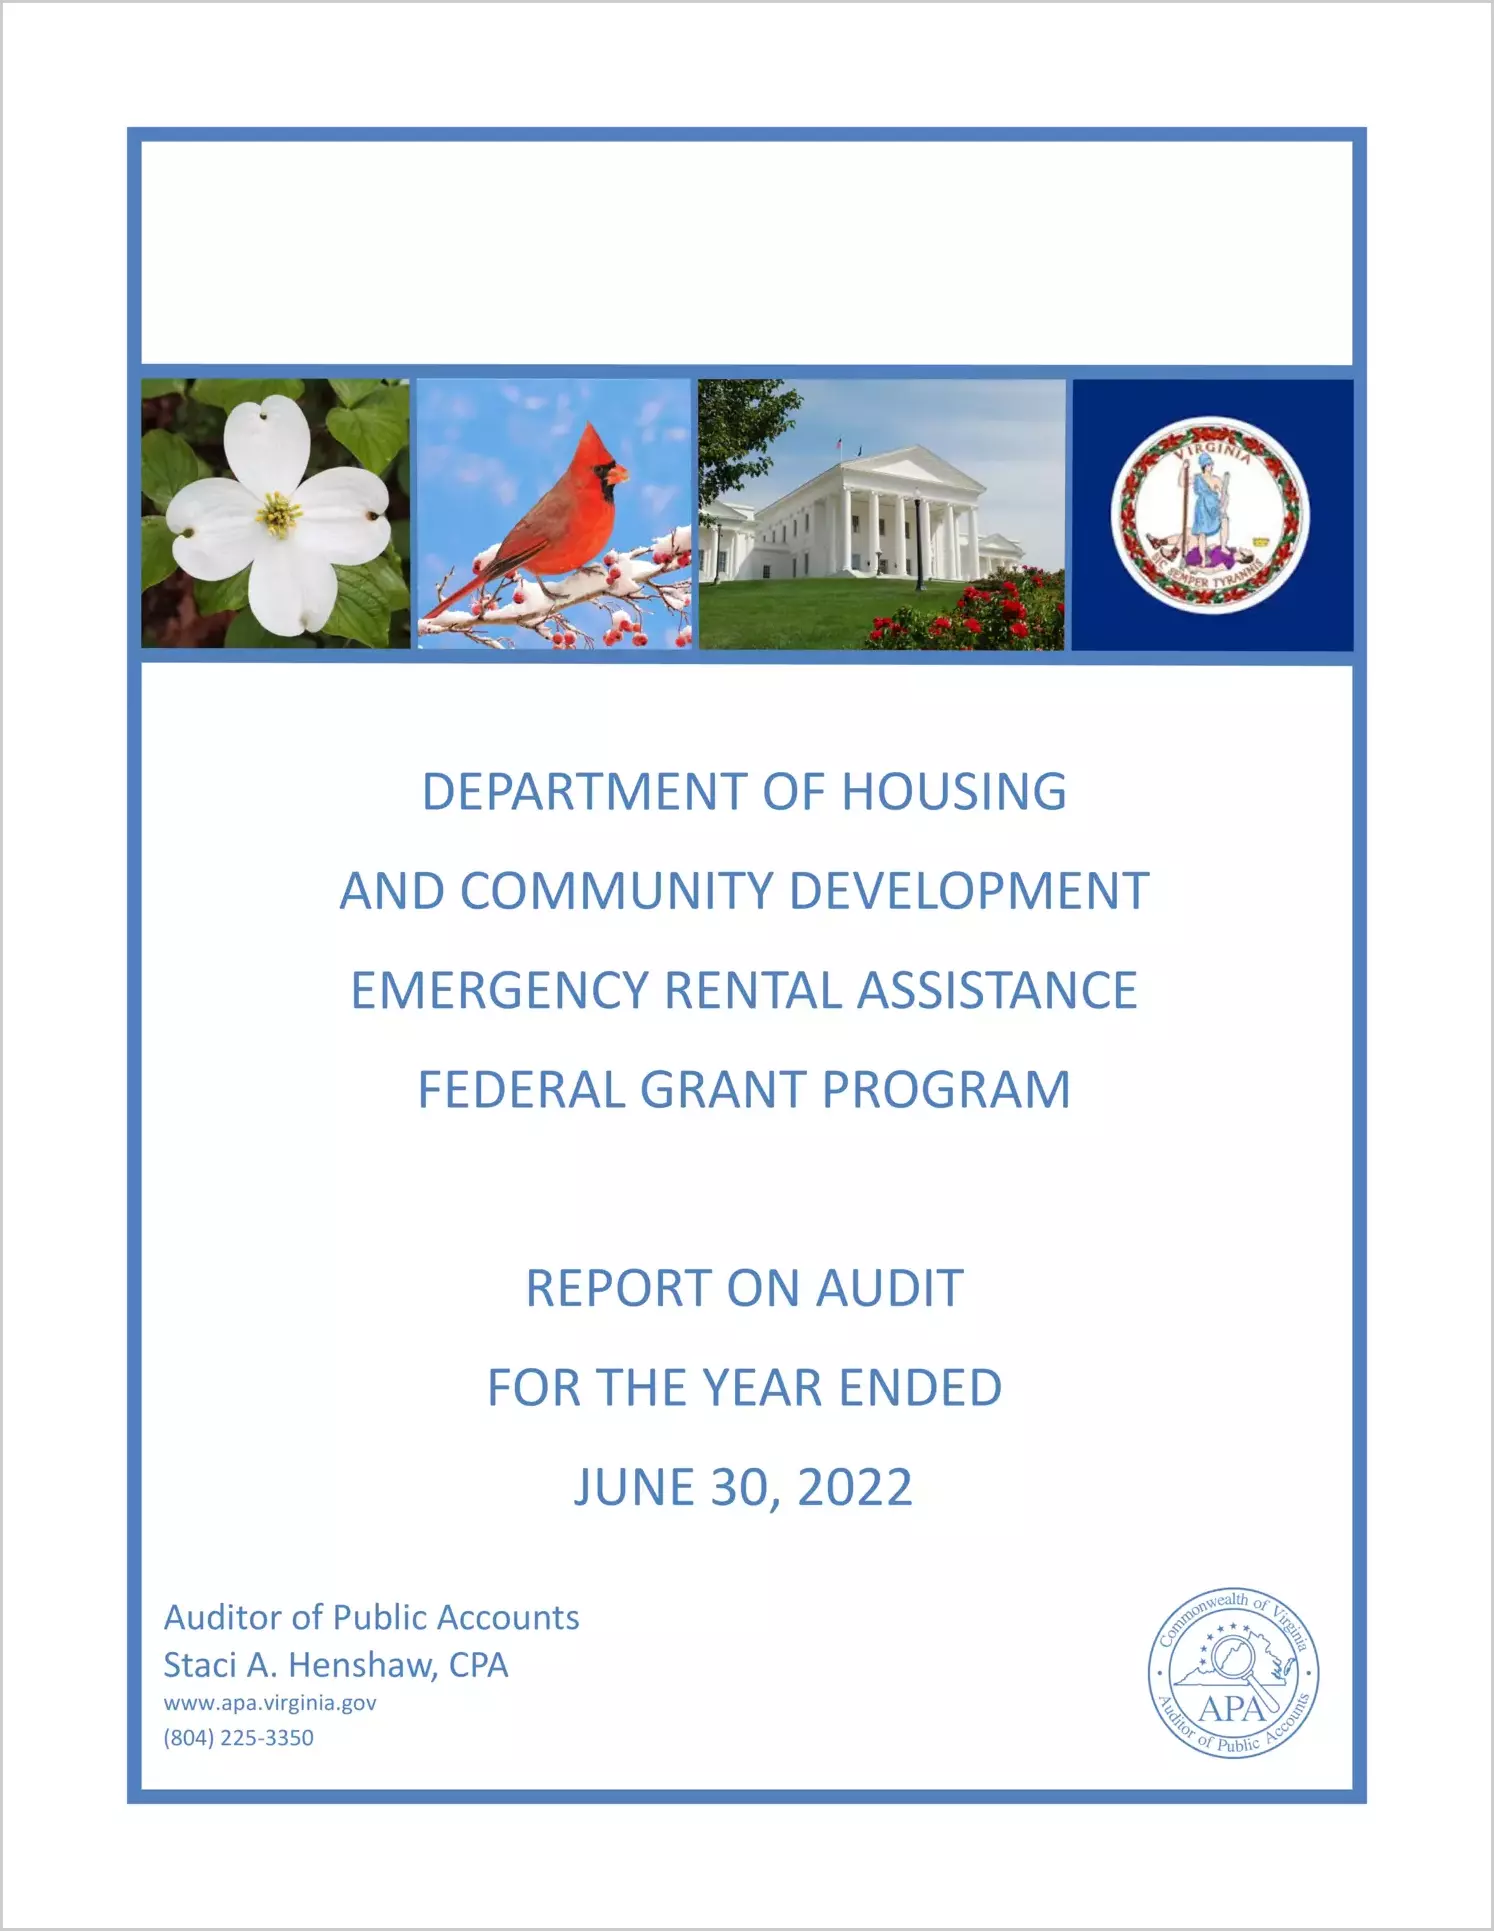 Department of Housing and Community Development Emergency Rental Assistance Federal Grant Program for the year ended June 30, 2022